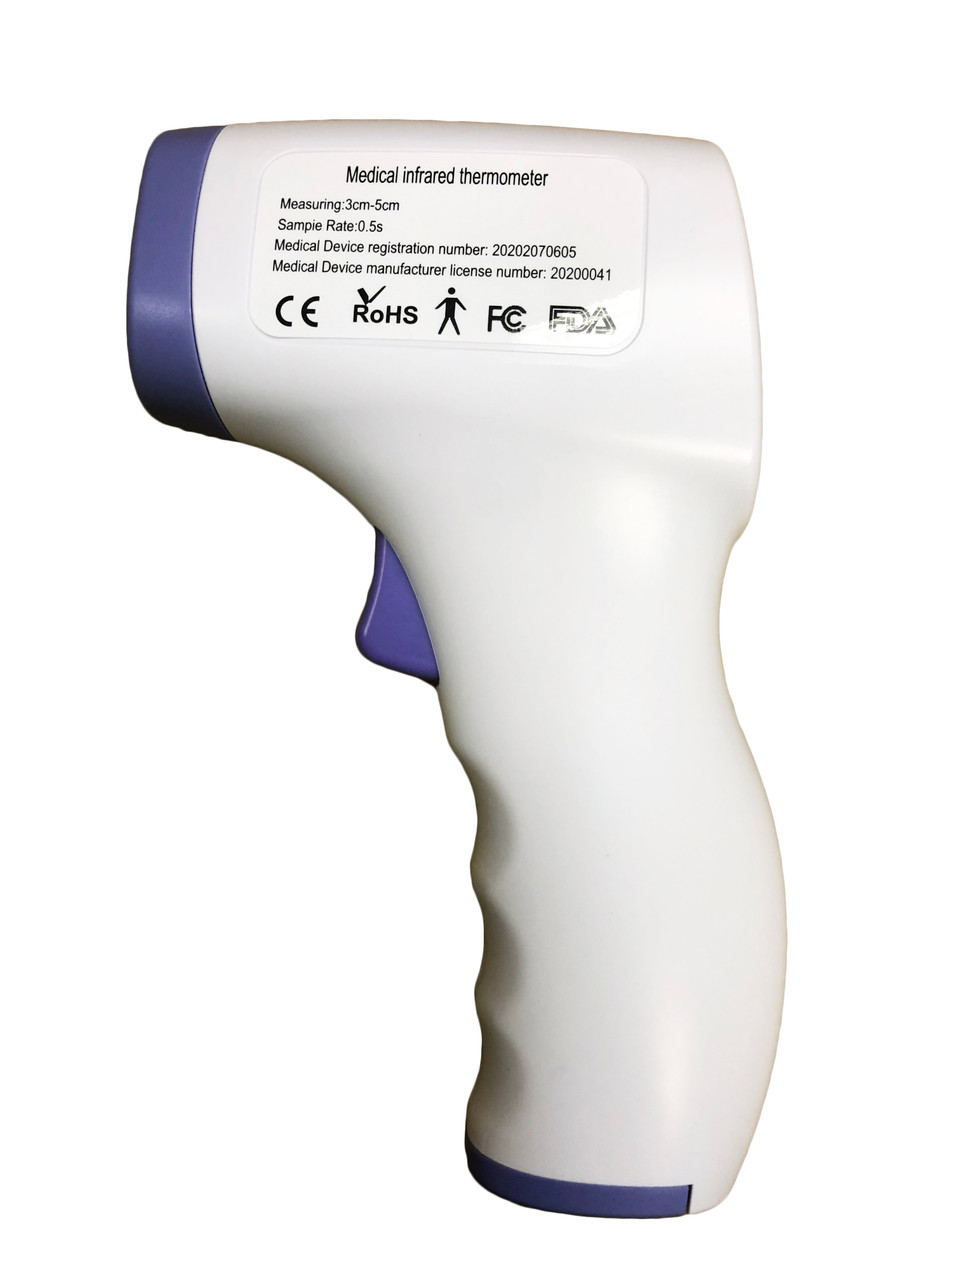 https://cdn11.bigcommerce.com/s-o23pa314c0/images/stencil/1280x1280/products/2536/4543/dikang_medical_infrared_thermometer_healthcare_jaken_medical_ppe__65162.1589732021.jpg?c=2?imbypass=on